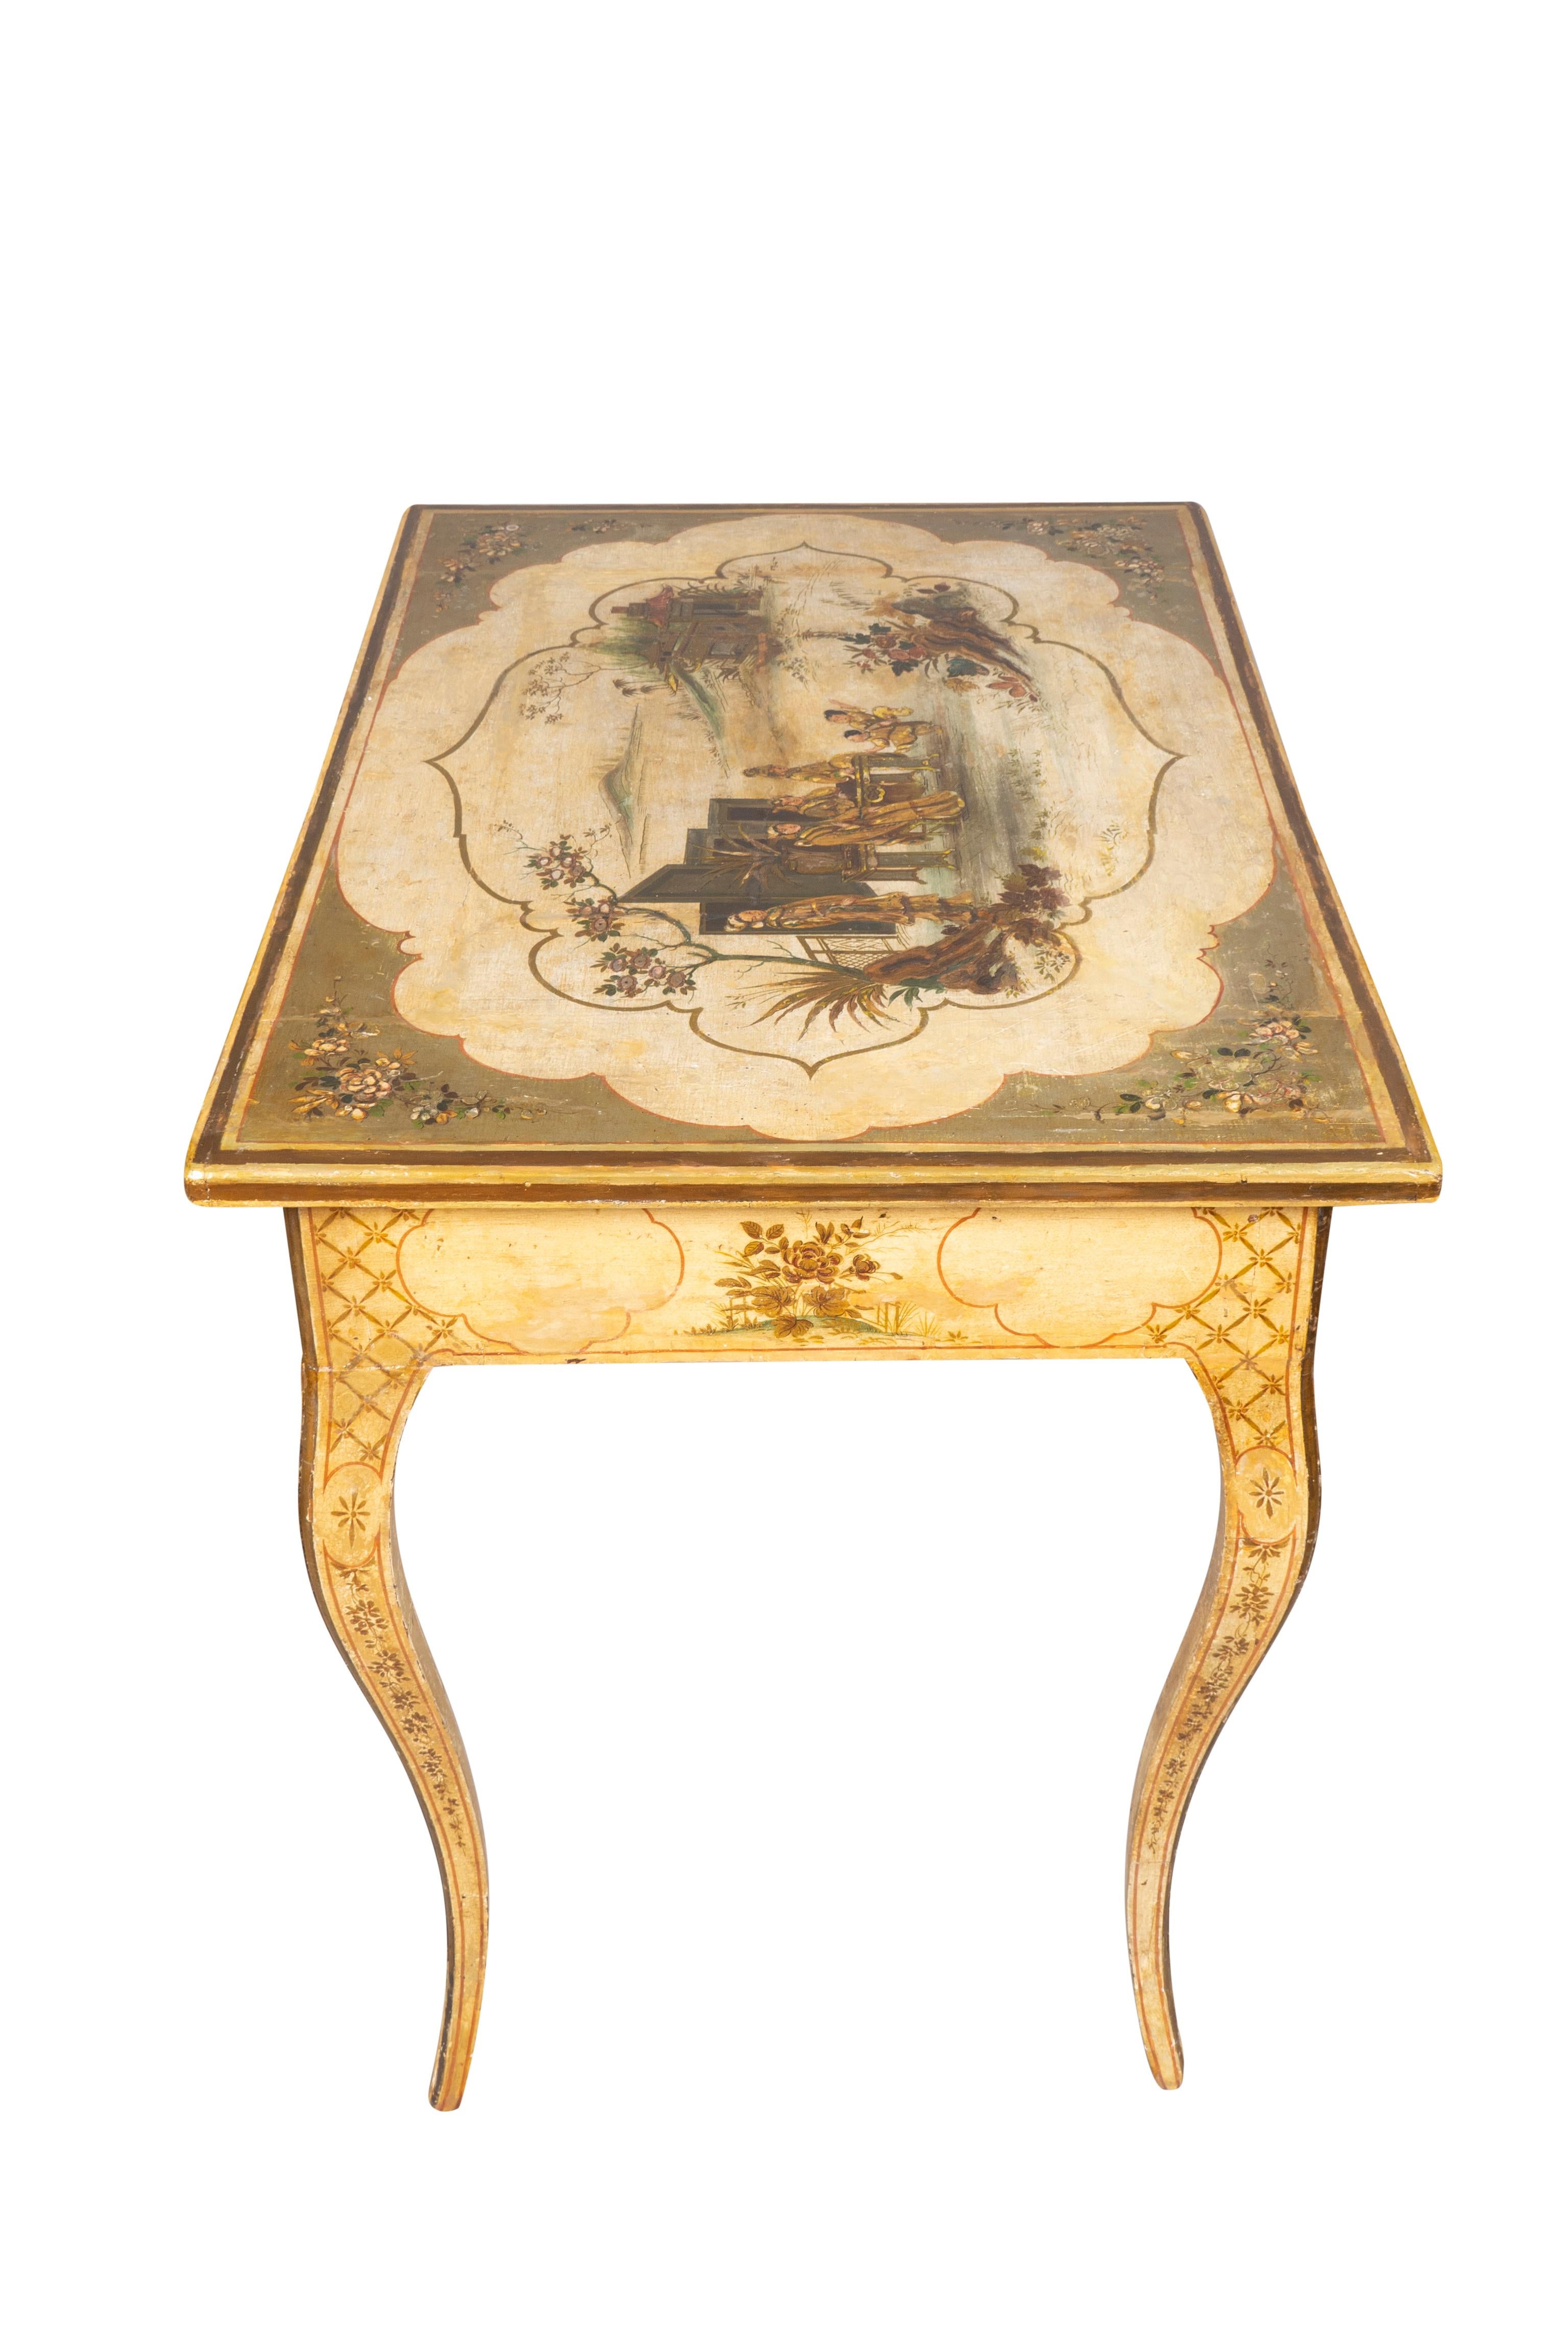 Late 18th Century Italian Rococo Chinoiserie Decorated Table For Sale